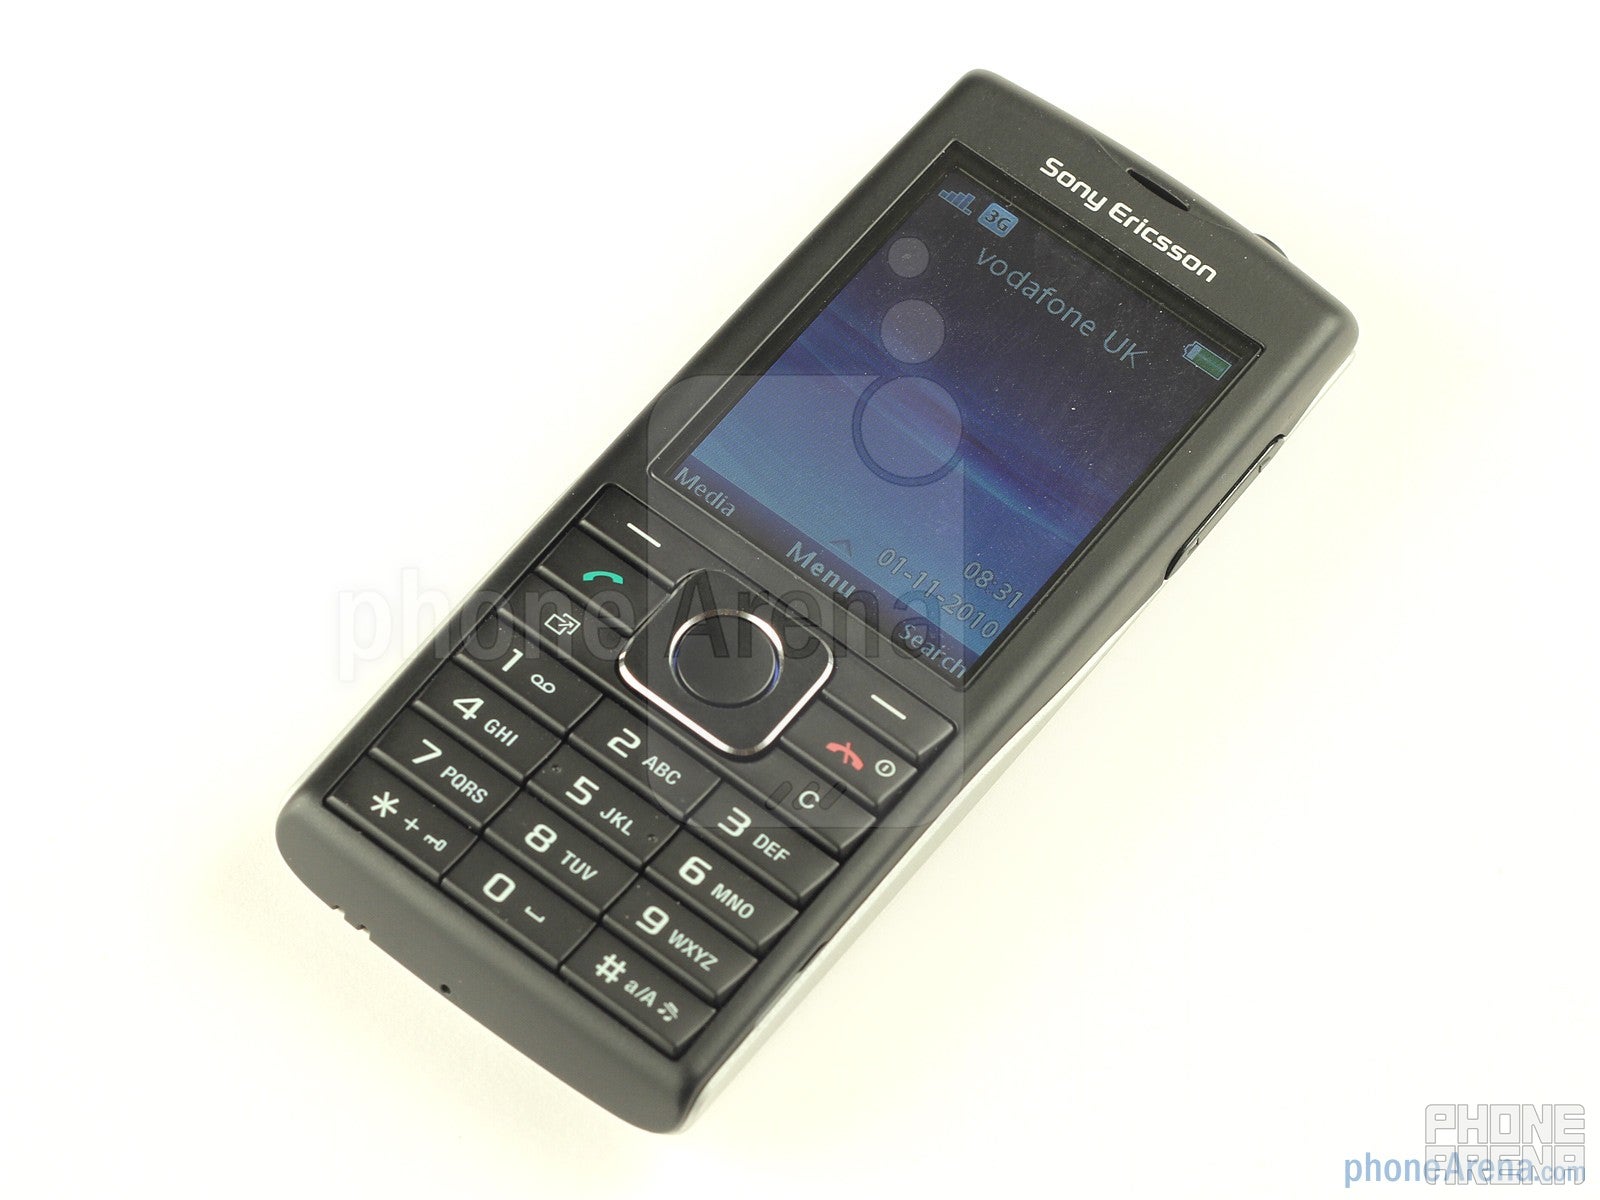 The phone has a 2.2 inch display - Sony Ericsson Cedar Review